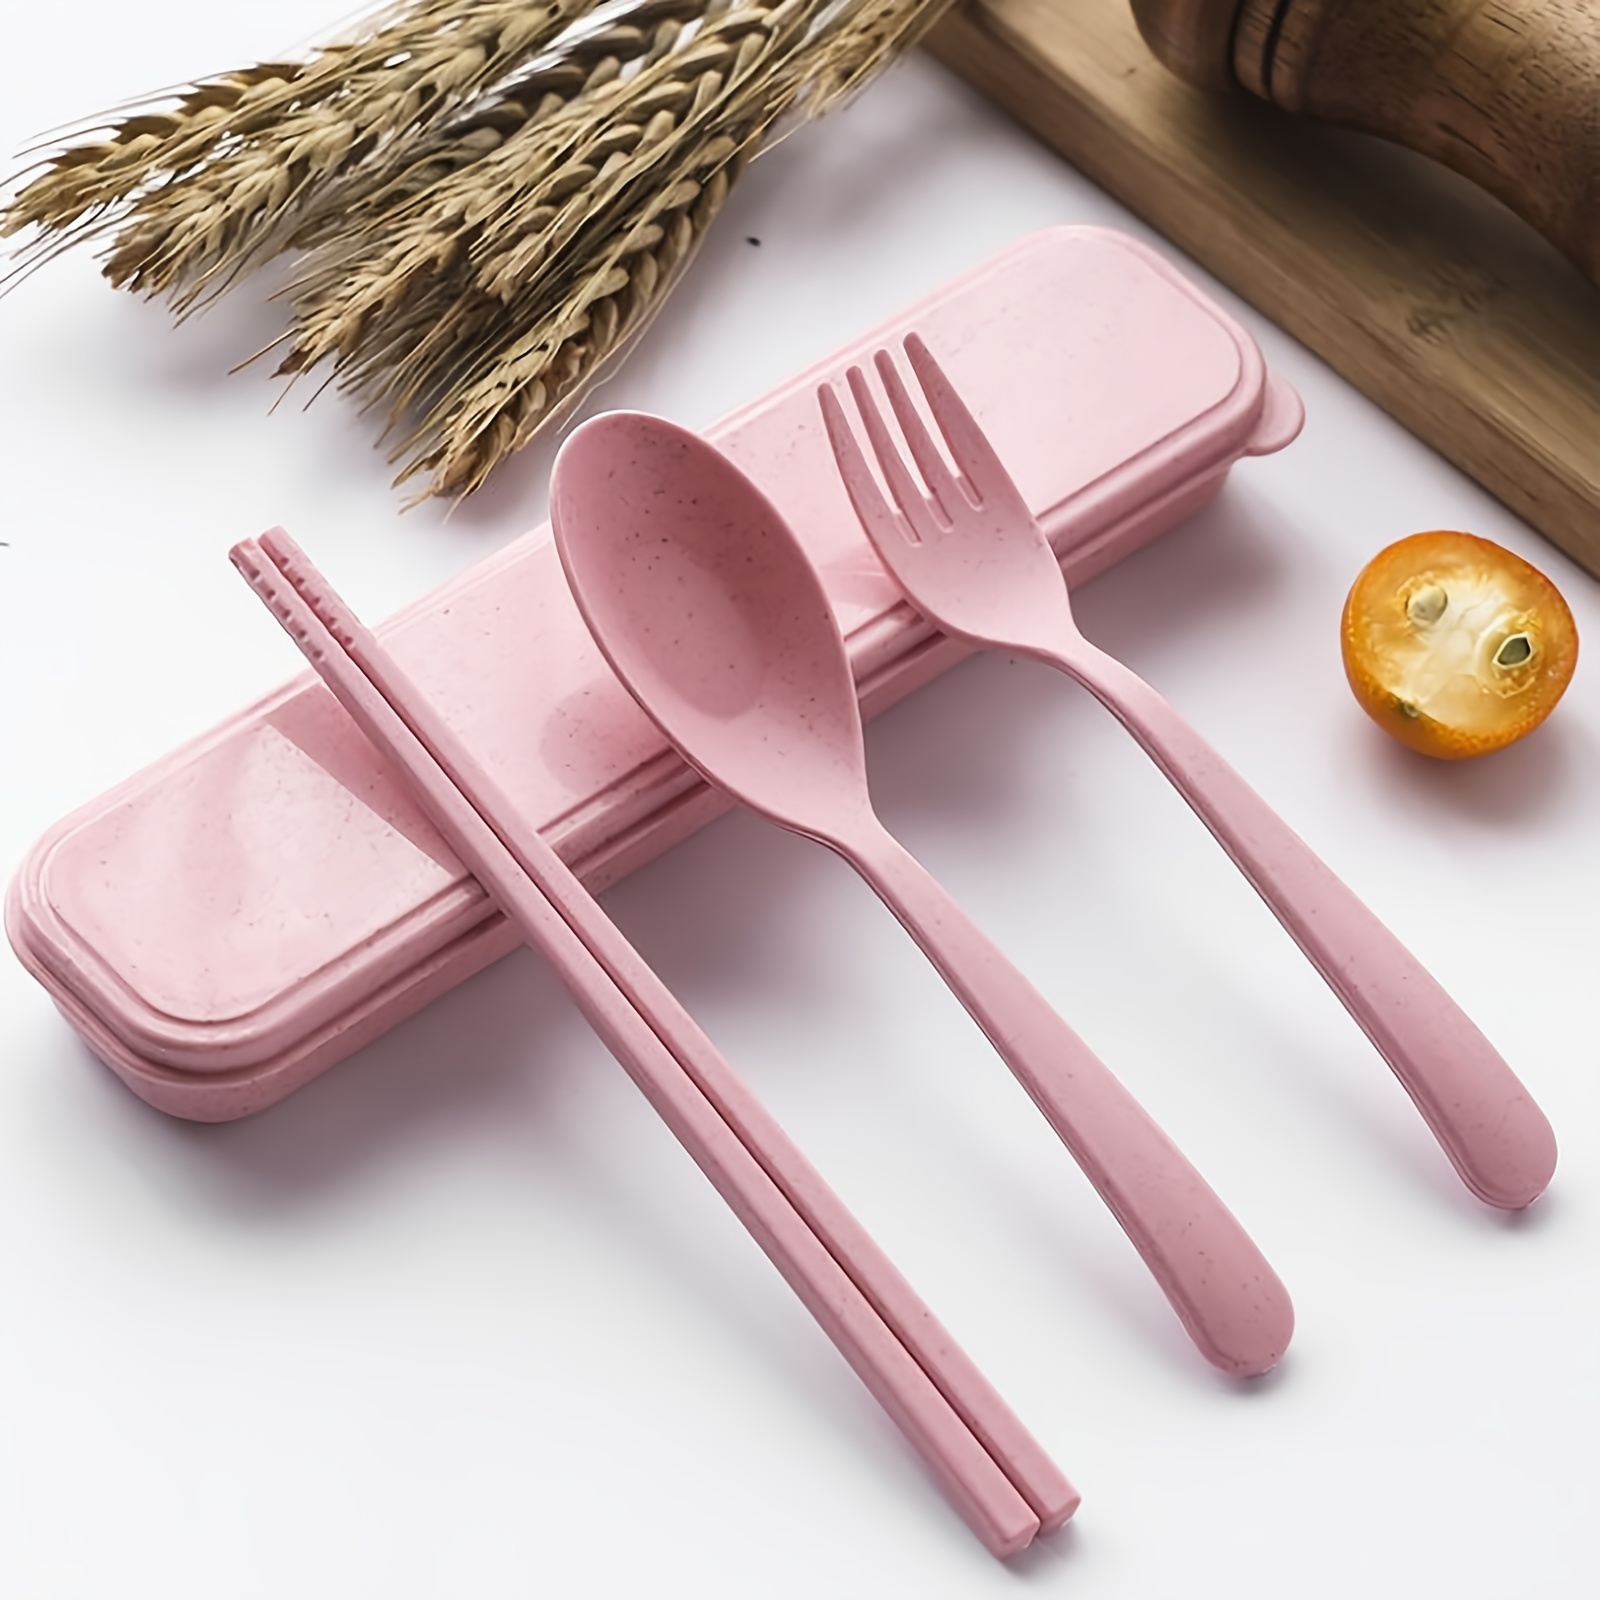 Travel Utensil Sets with Case, 4 Sets Wheat Straw Reusable Spoon Knife Forks Tableware, Portable Cutlery for Kids Adult Travel Picnic Camping or